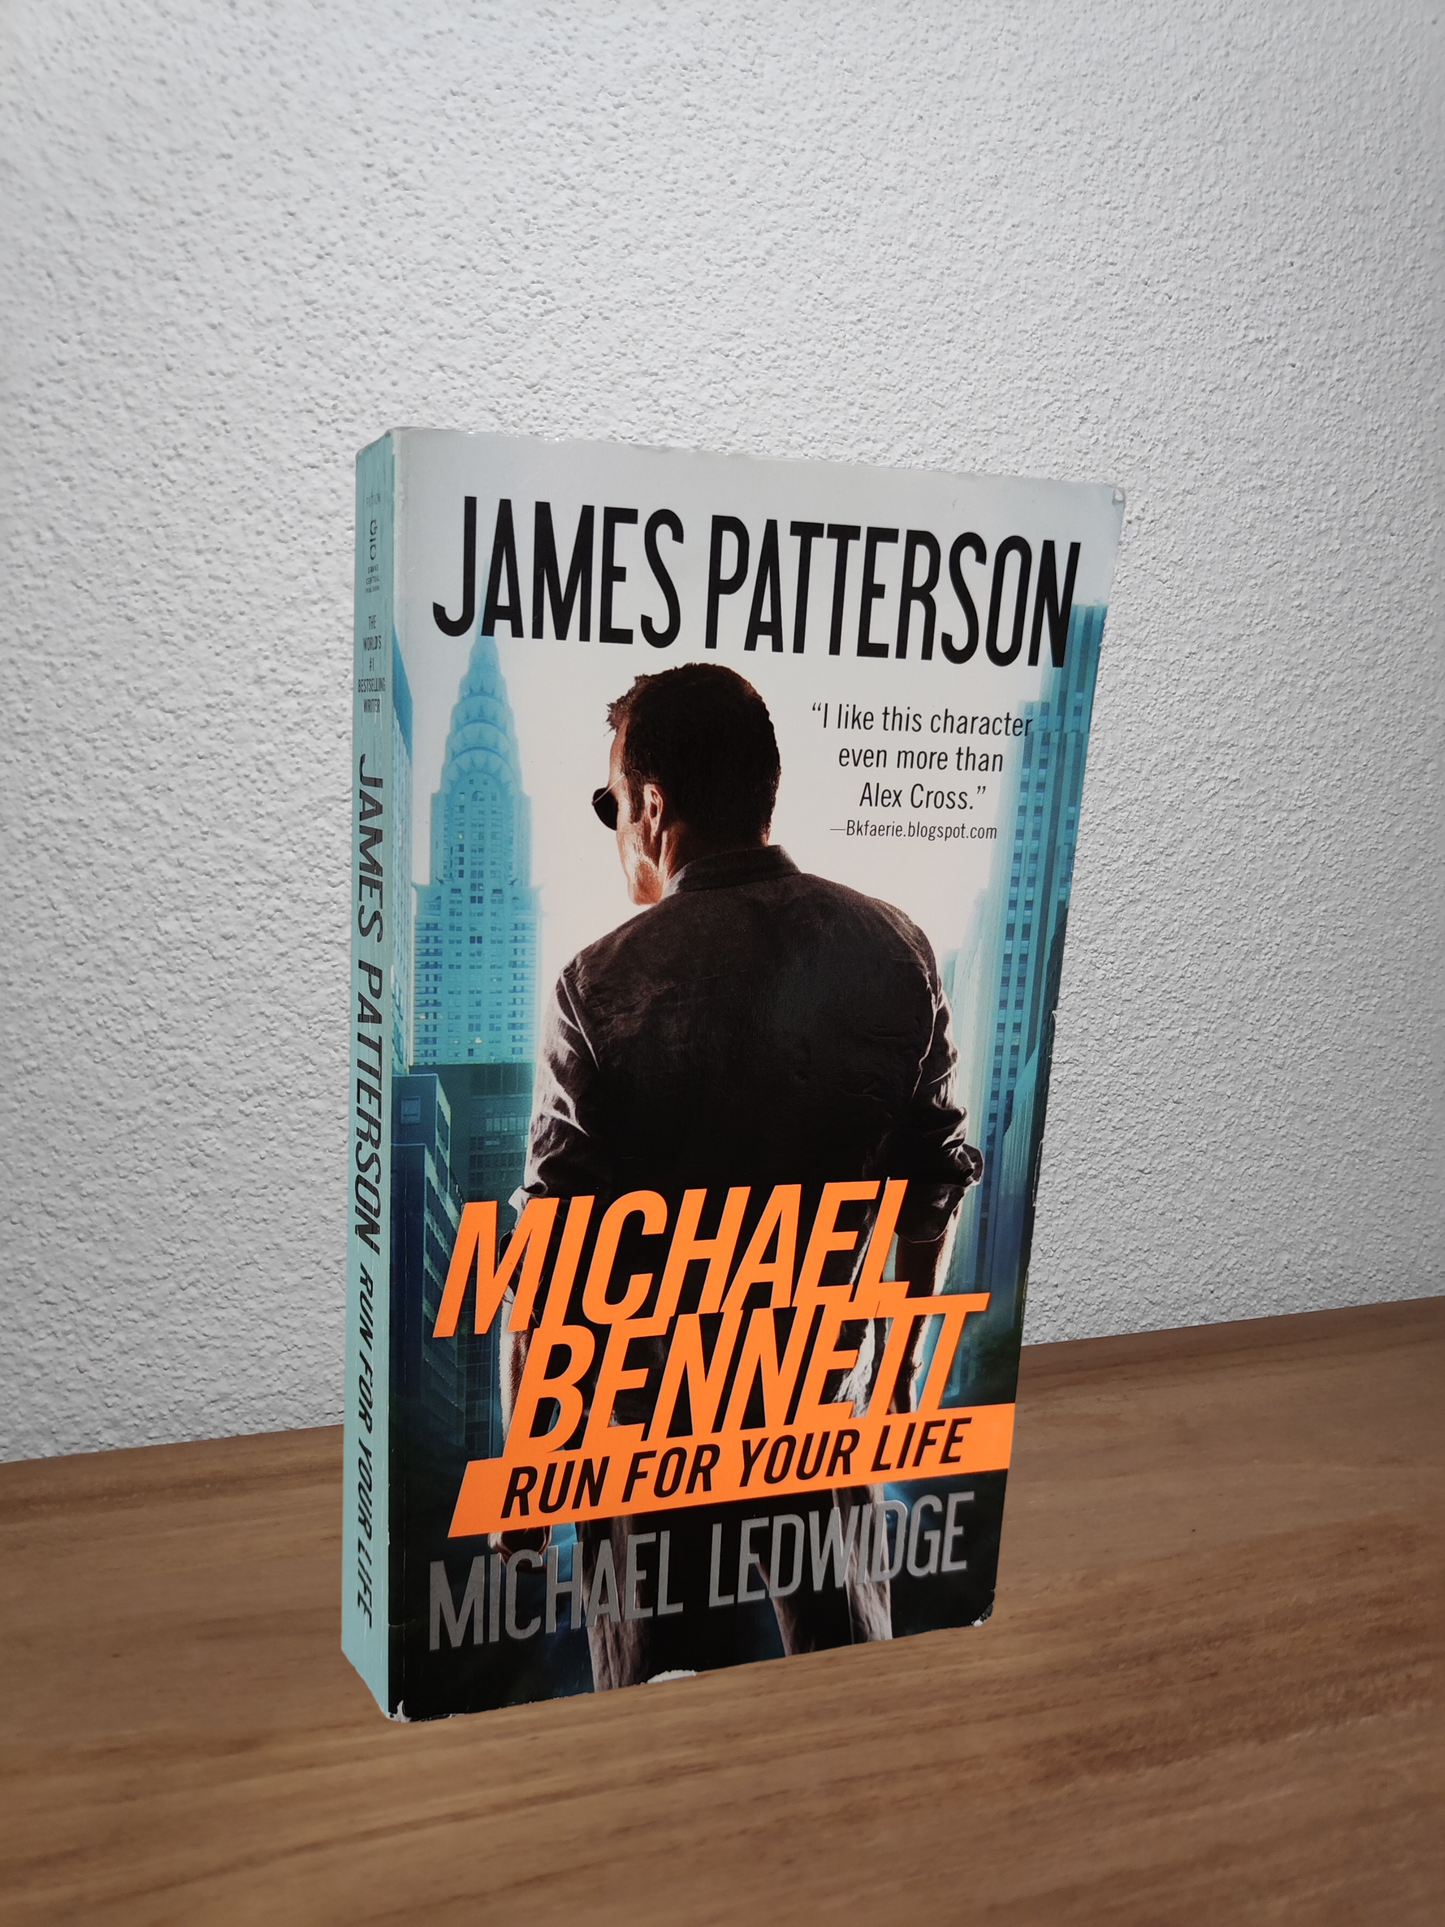 James Patterson - Run For Your Life (Michael Bennett #2)